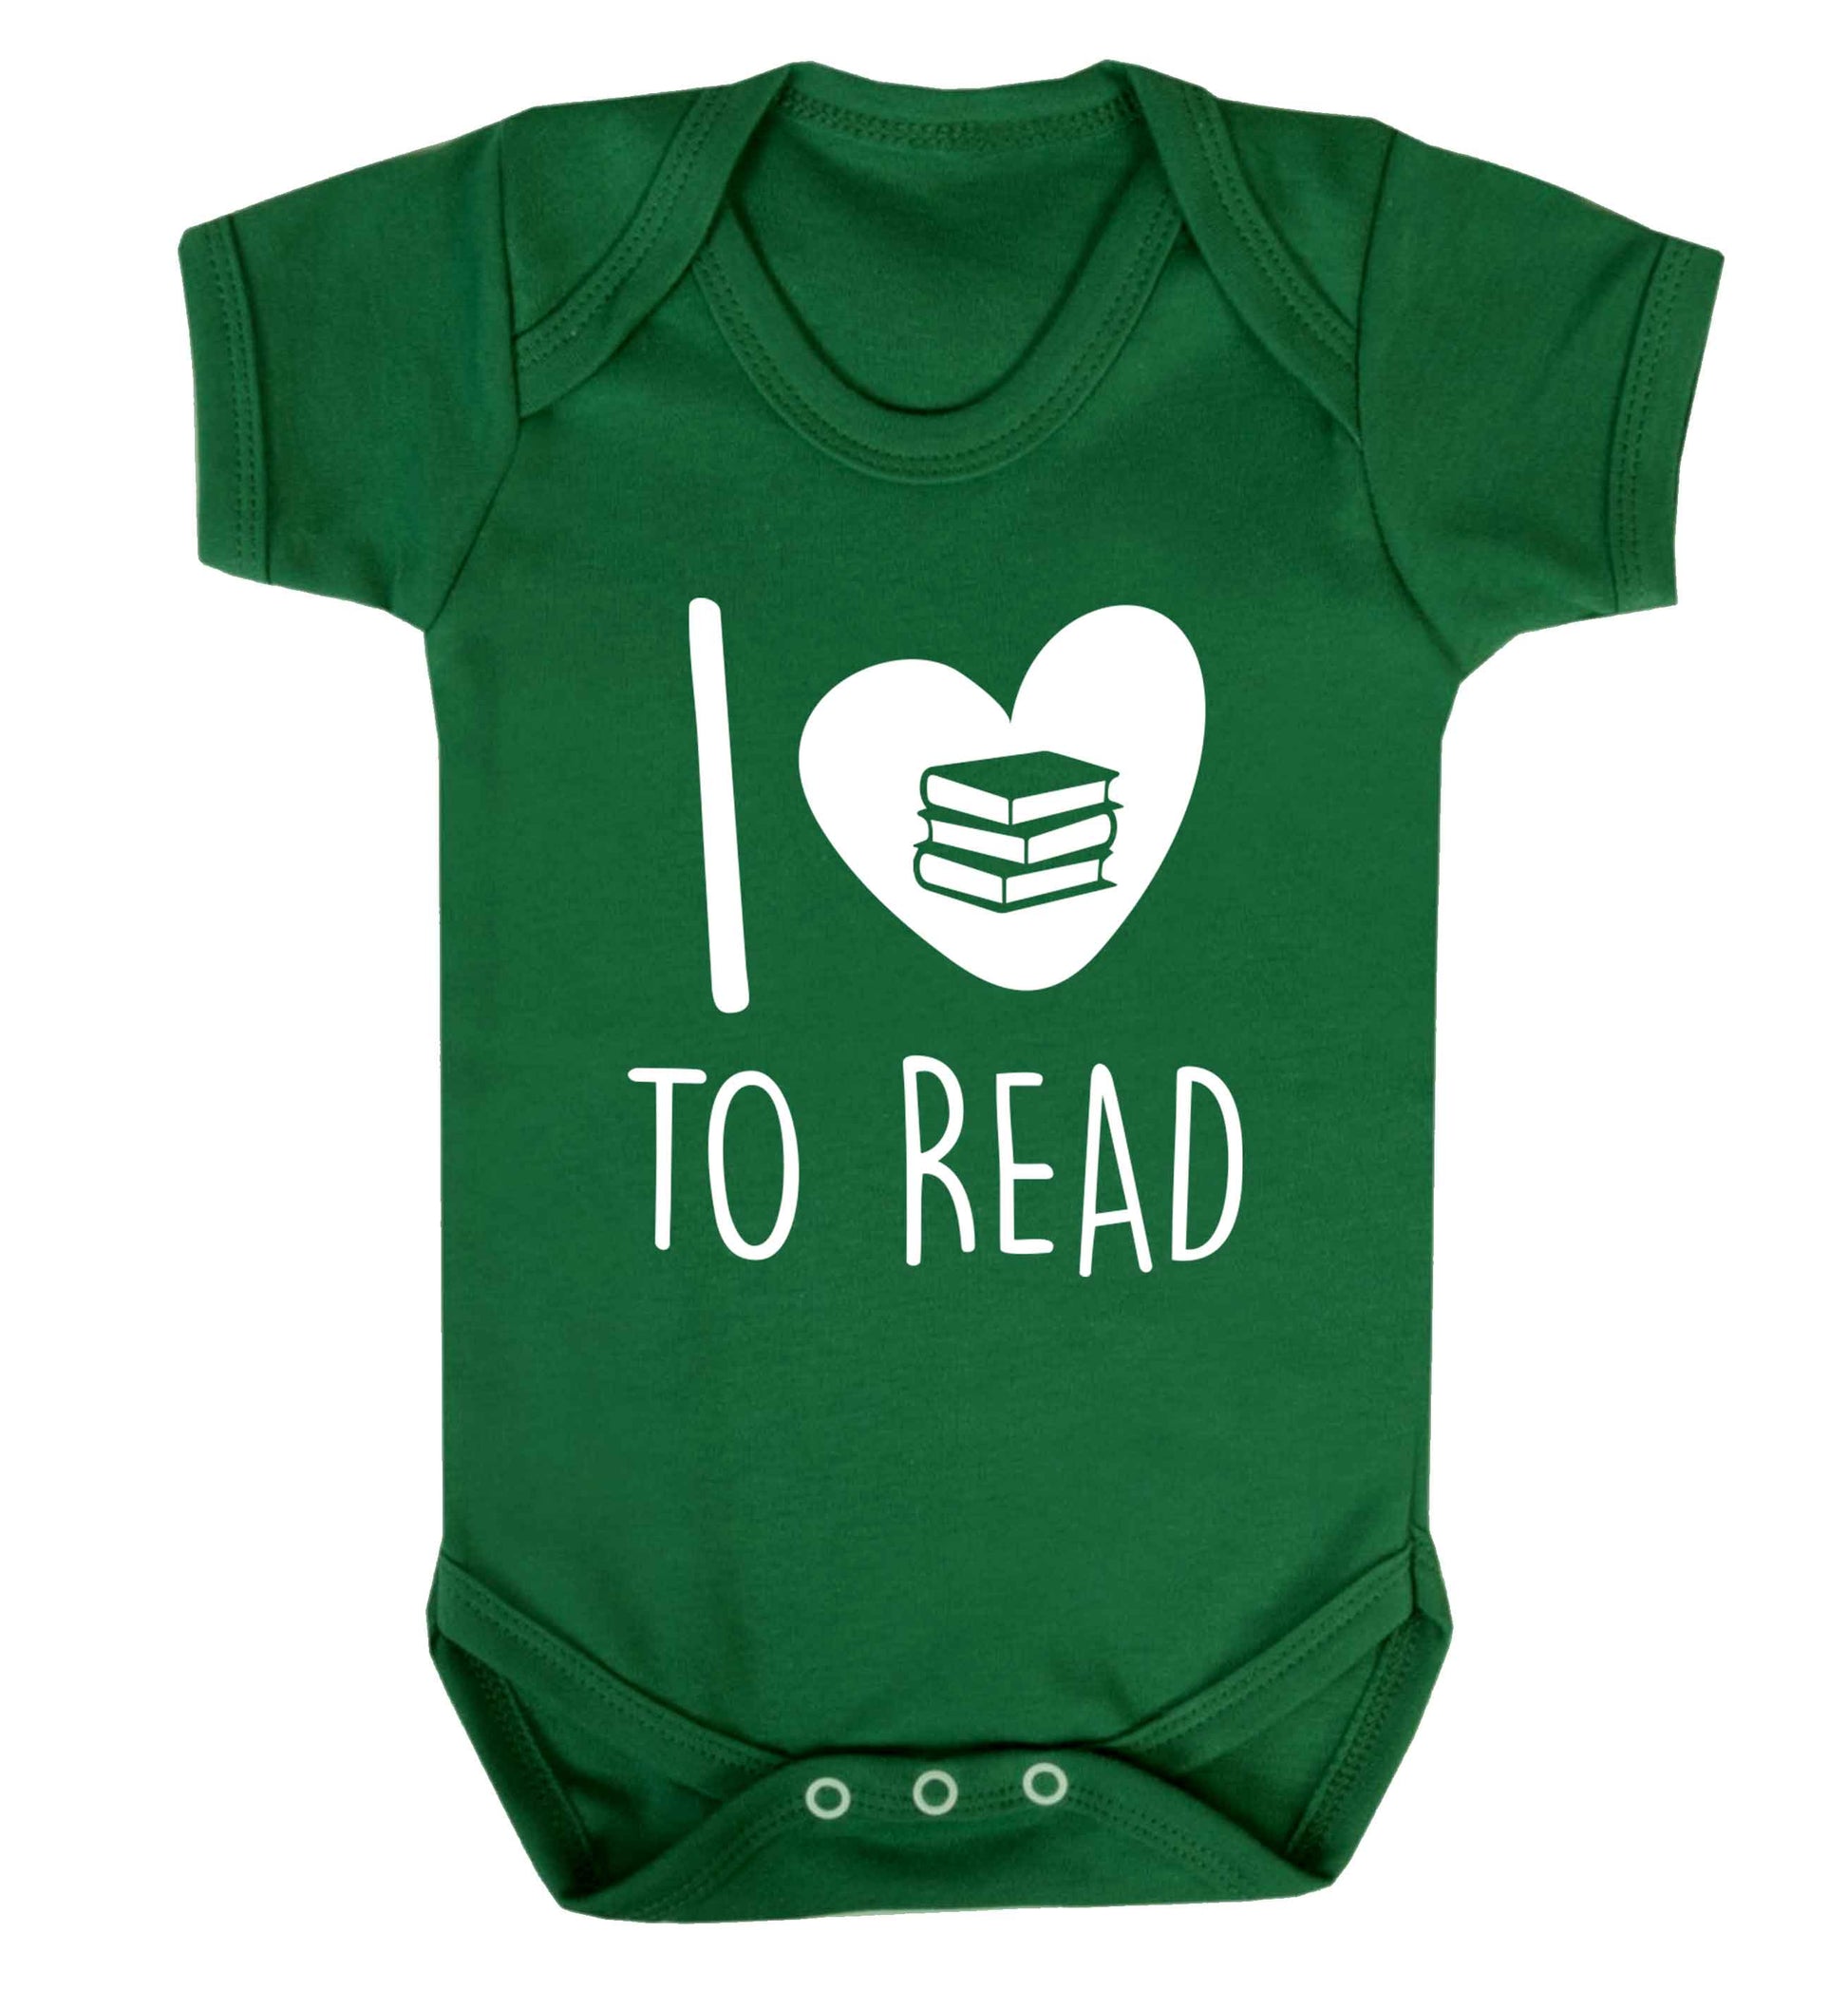 I love to read Baby Vest green 18-24 months